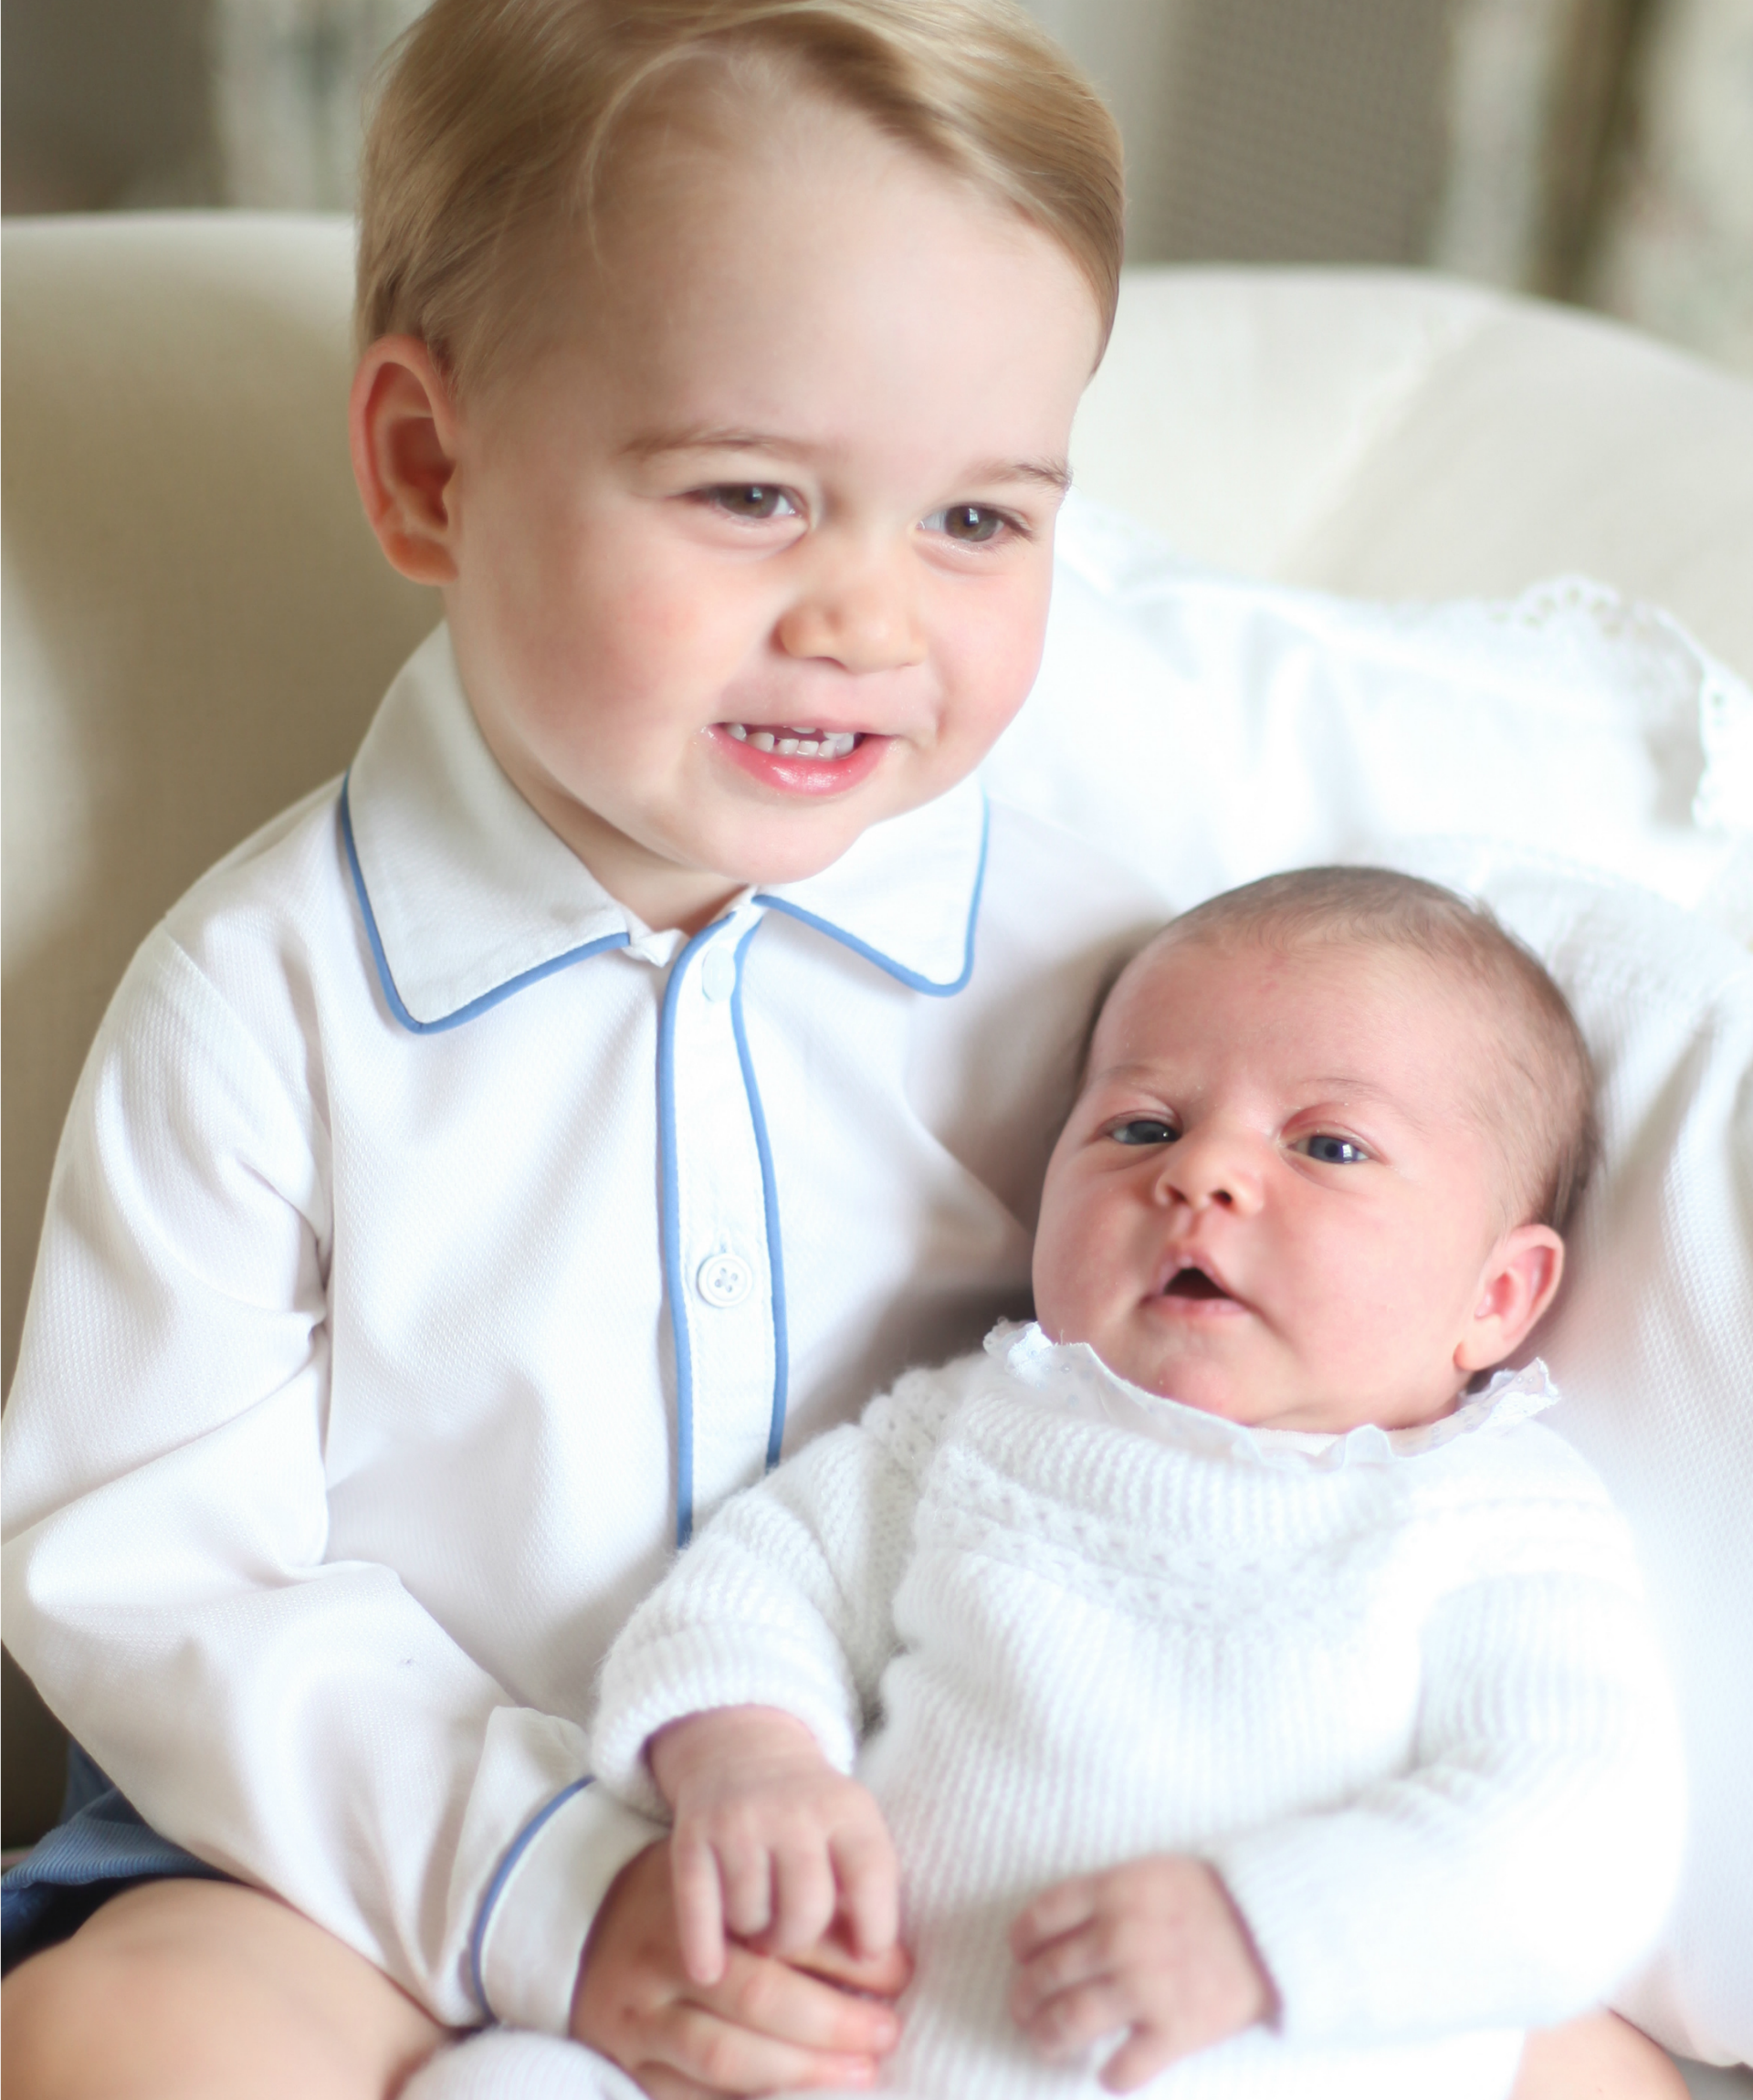 Kate shares beautiful pictures of Princess at home